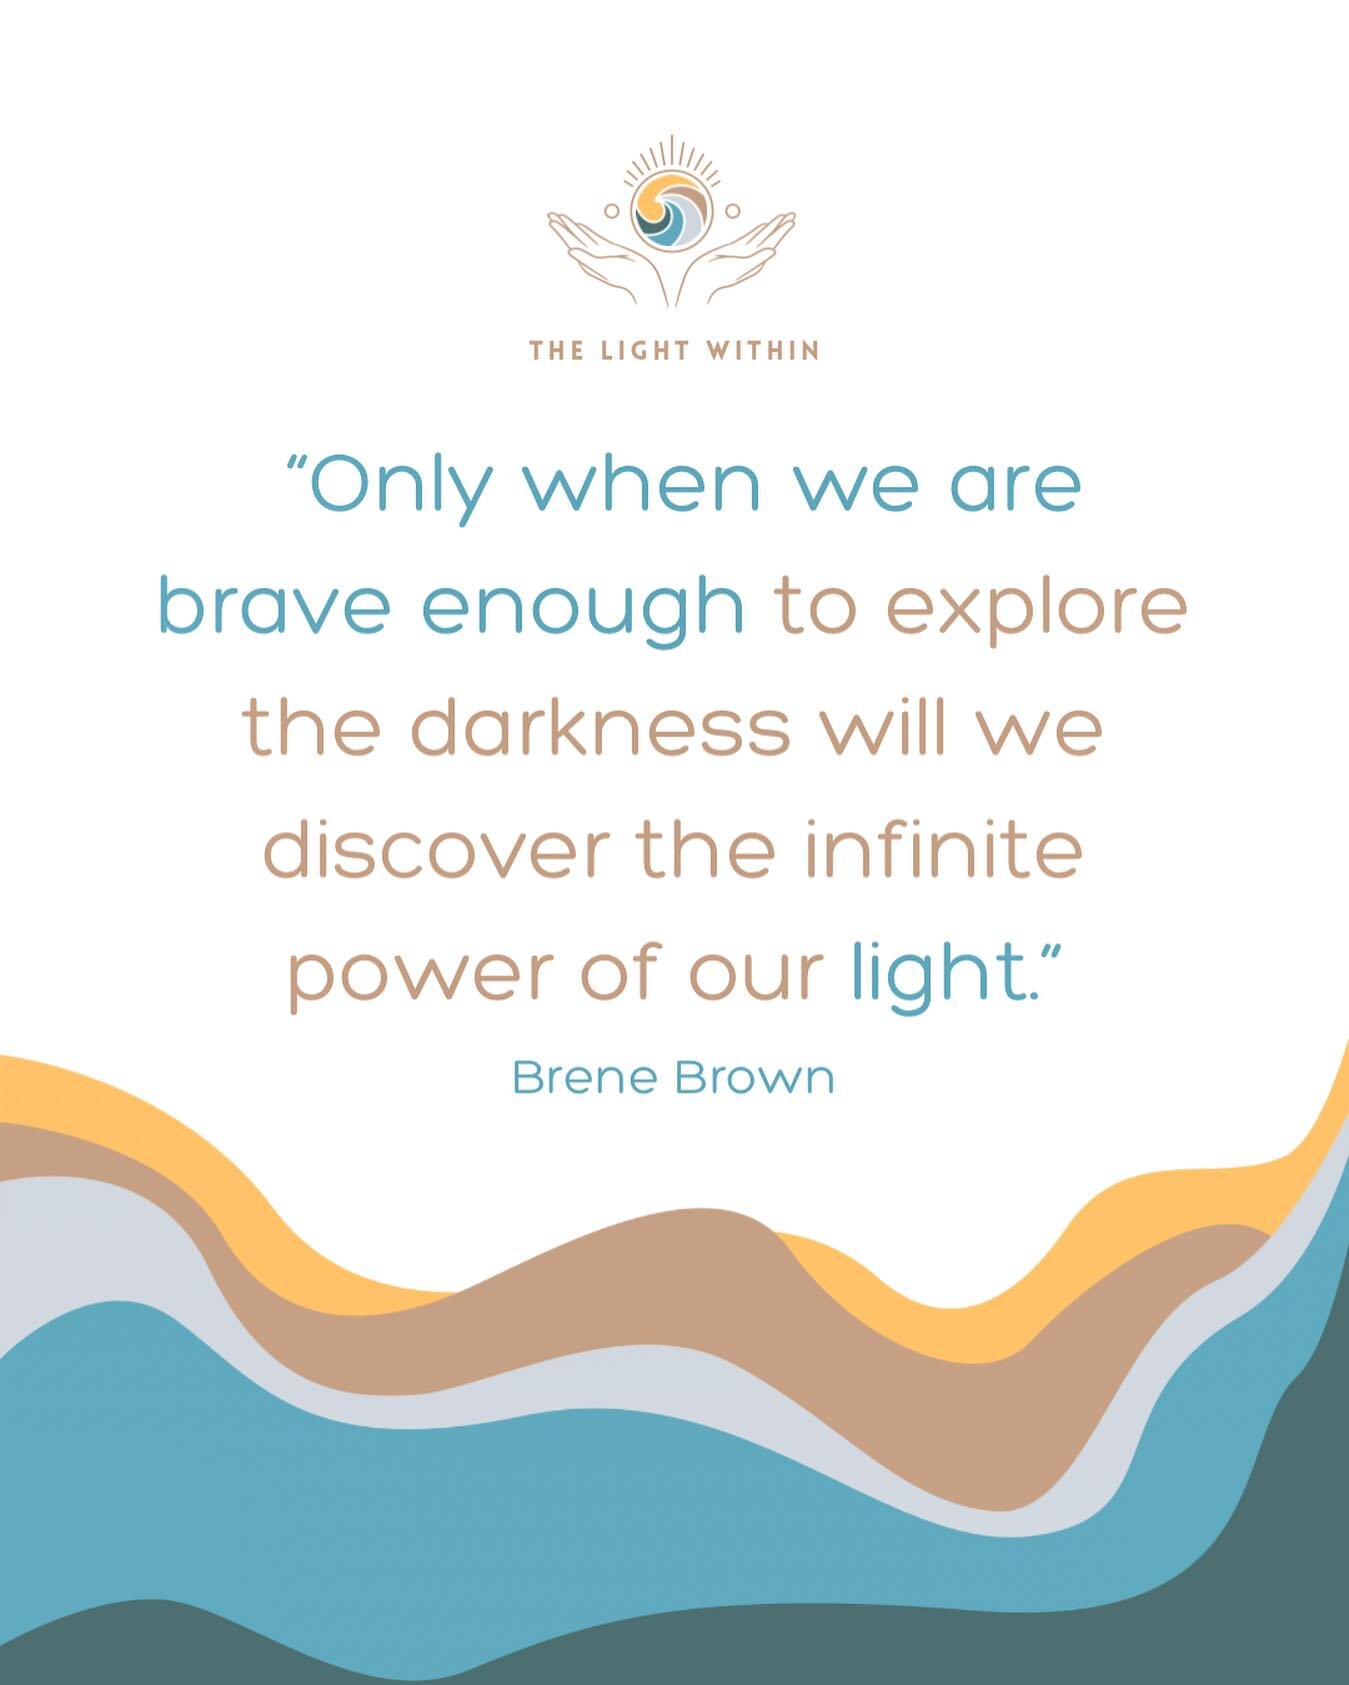 The Divine light is within us all. The Light is us and we are the Light. ✨

If you are feeling disconnected from your inner shine, we invite you to join us for one of our 5-day retreats where we leverage the power of the ocean, and a sense of communi